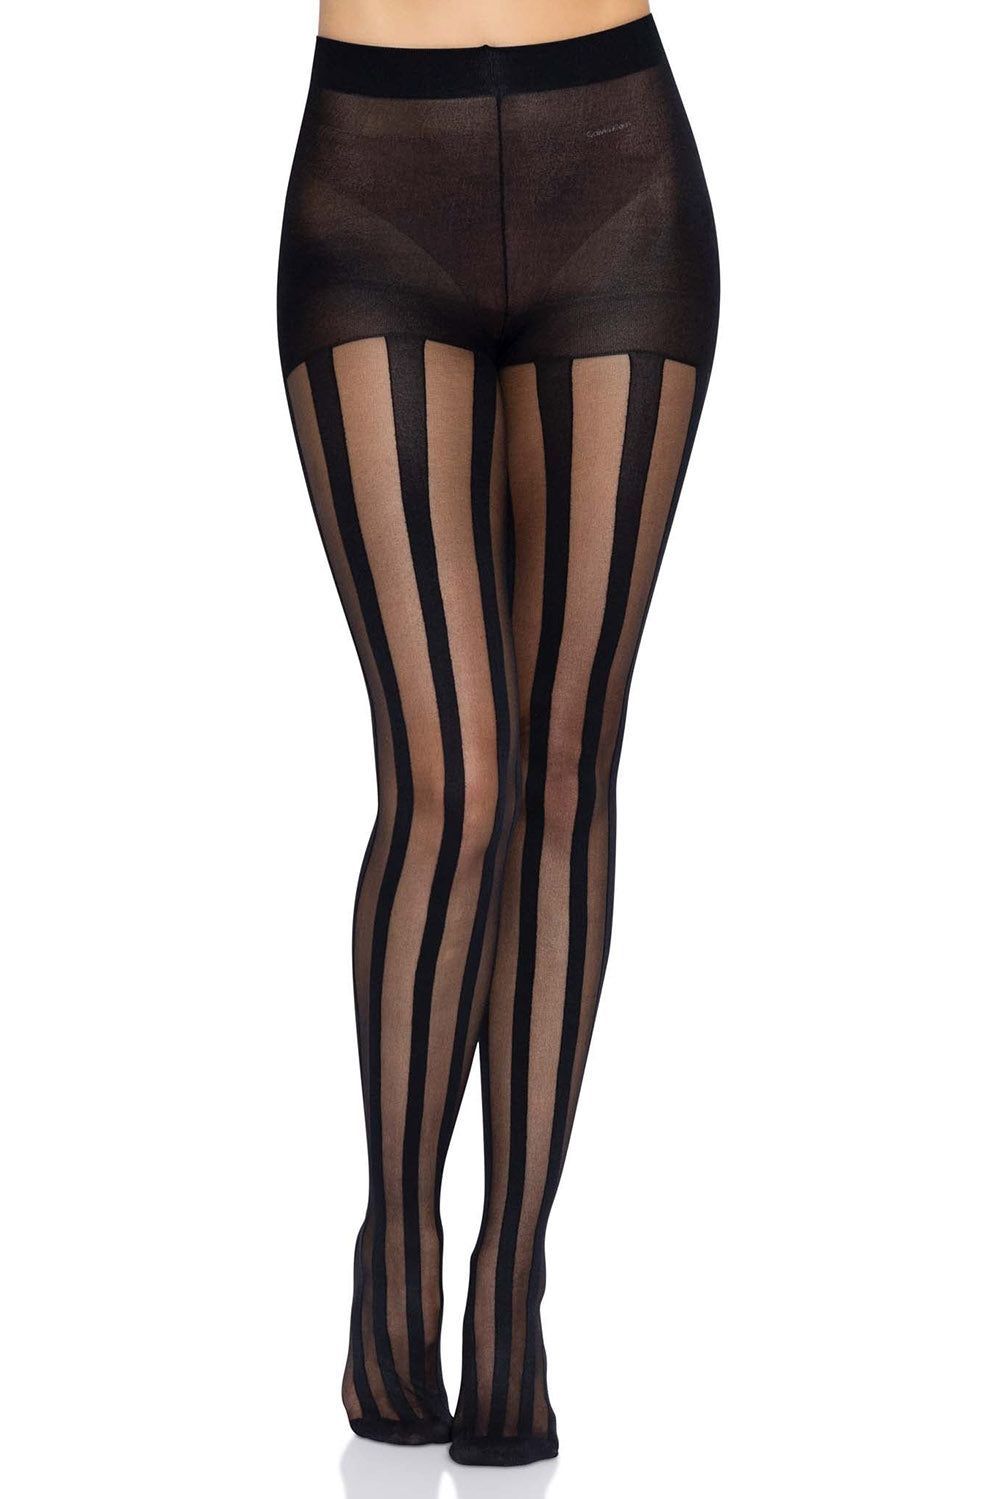 Villainy Vertical Striped Tights